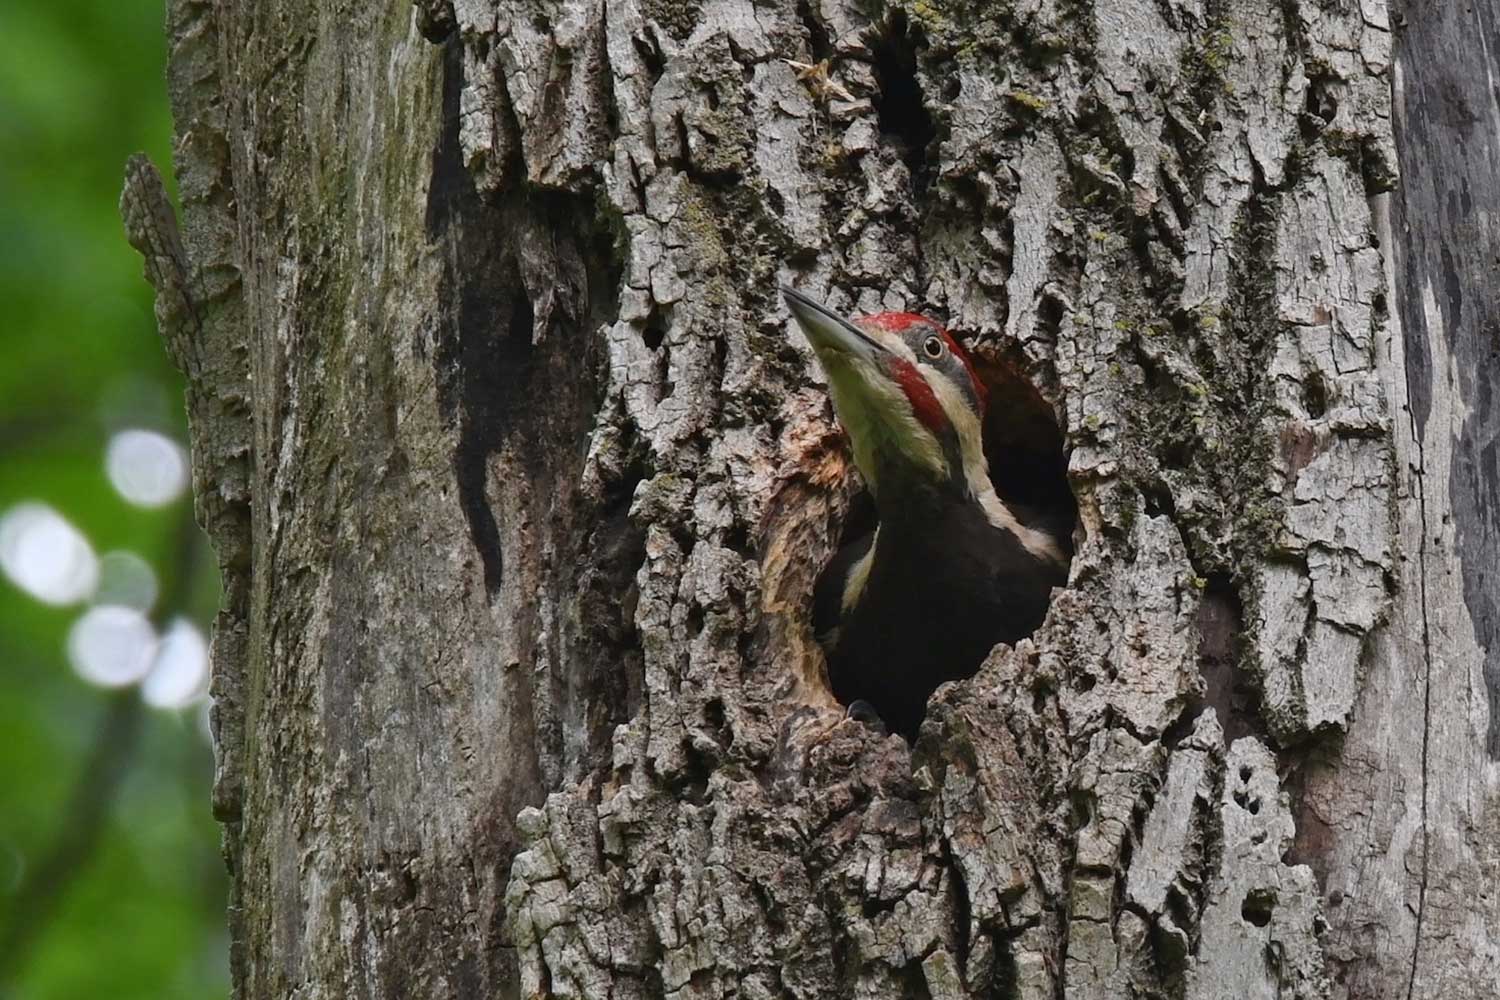 A pileated woodpecker sticking its head out of a tree cavity.